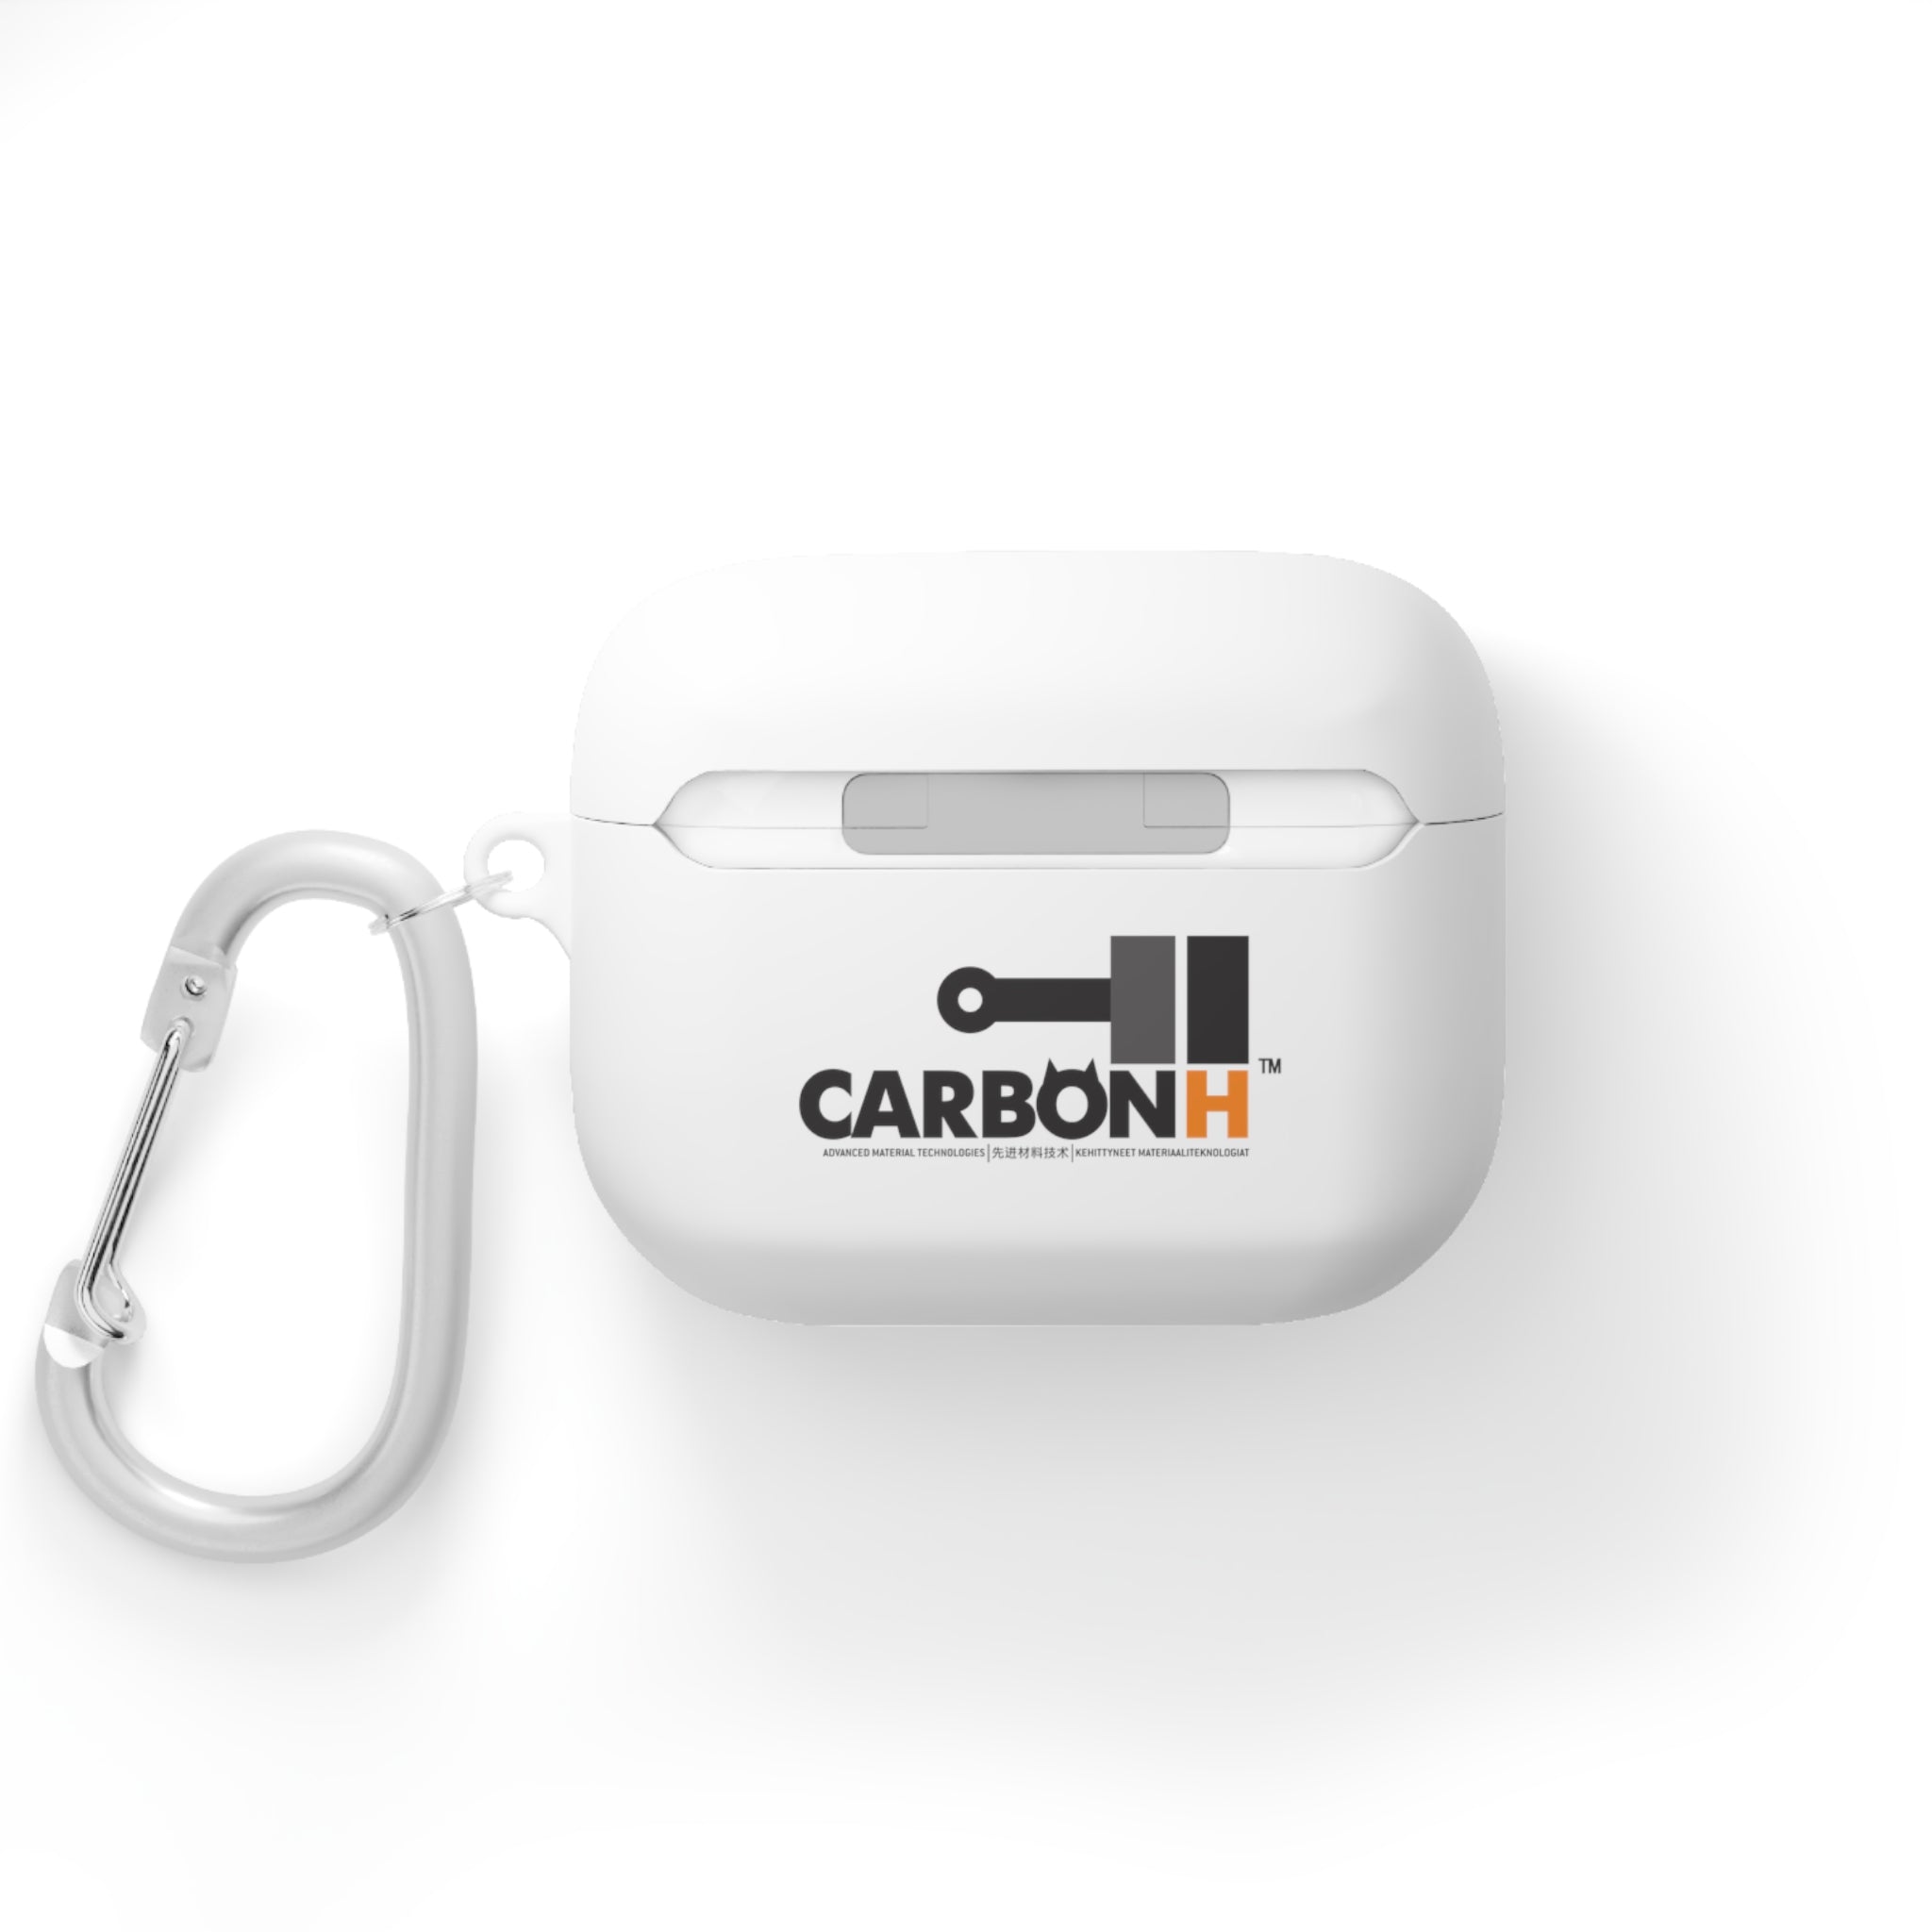 CARBONH AirPods Pro Case Cover